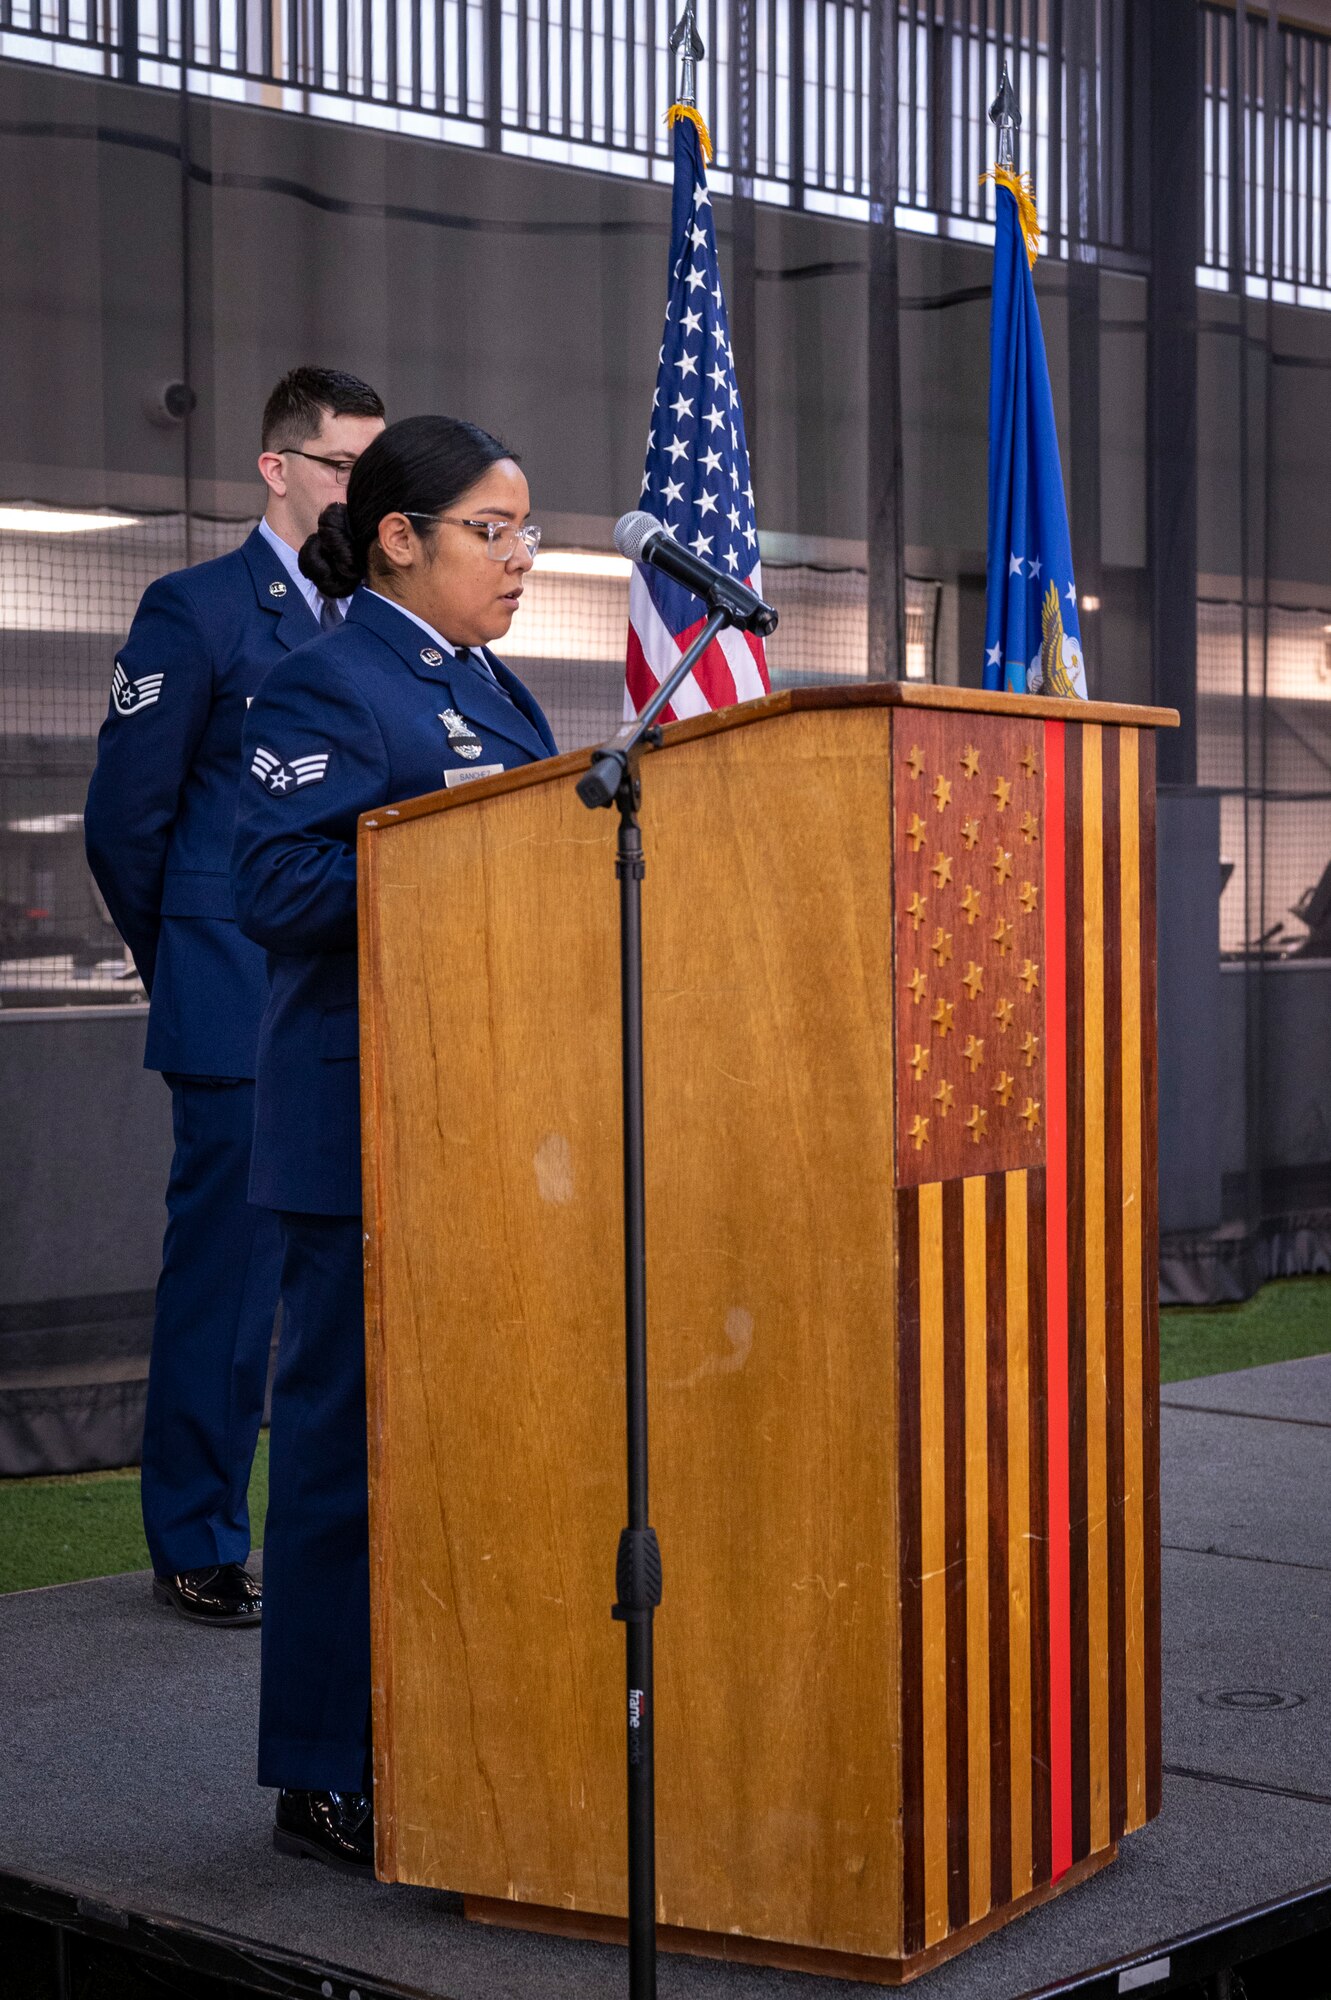 An airman reads a prayer during a ceremony